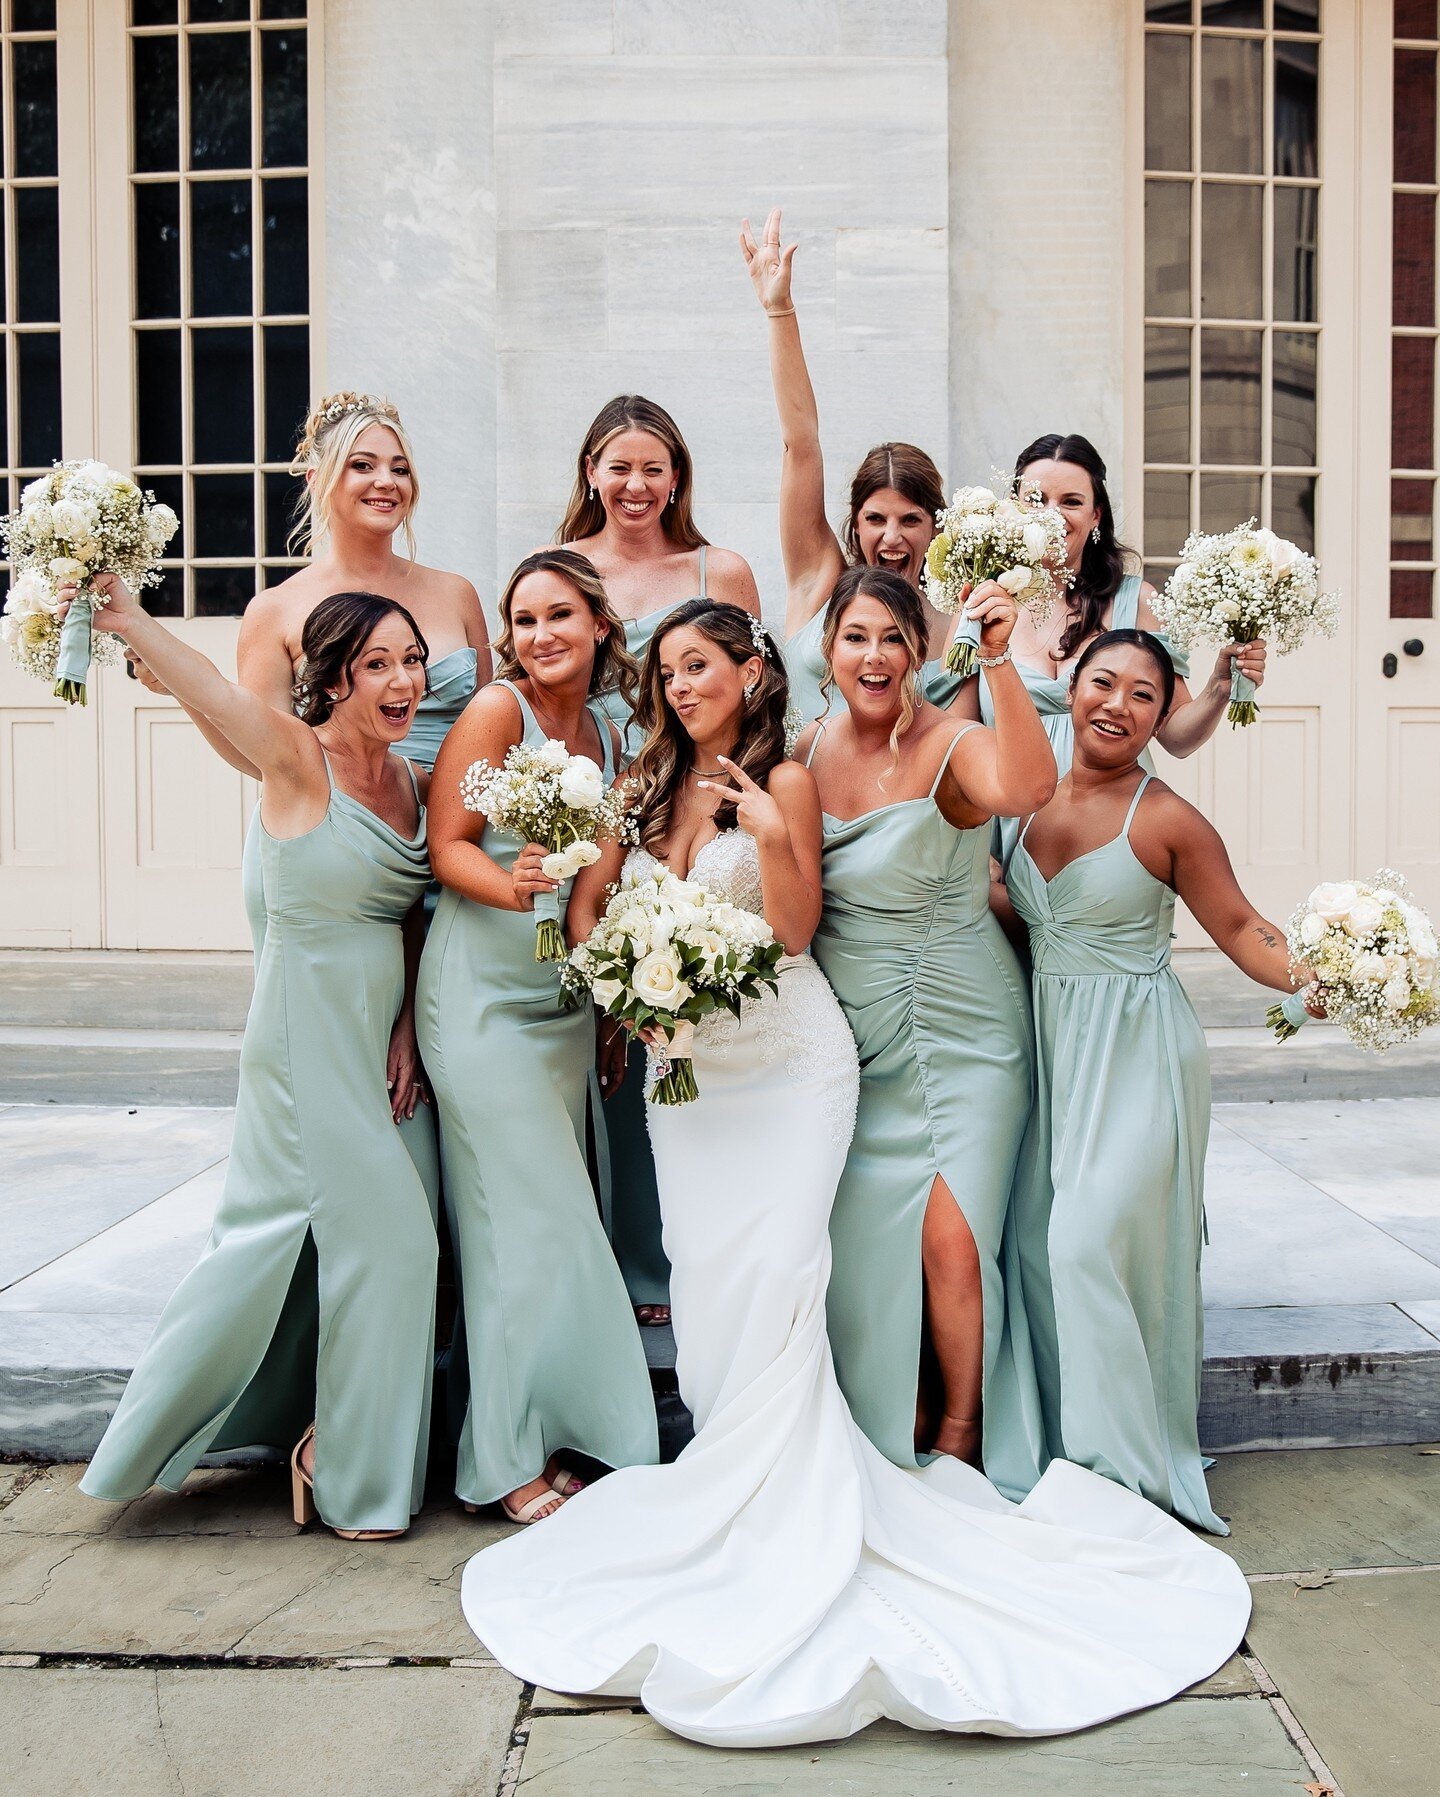 Surround yourself with those who are there through thick and thin, who celebrate your every win!
.
.
📷 @newpaceweddings